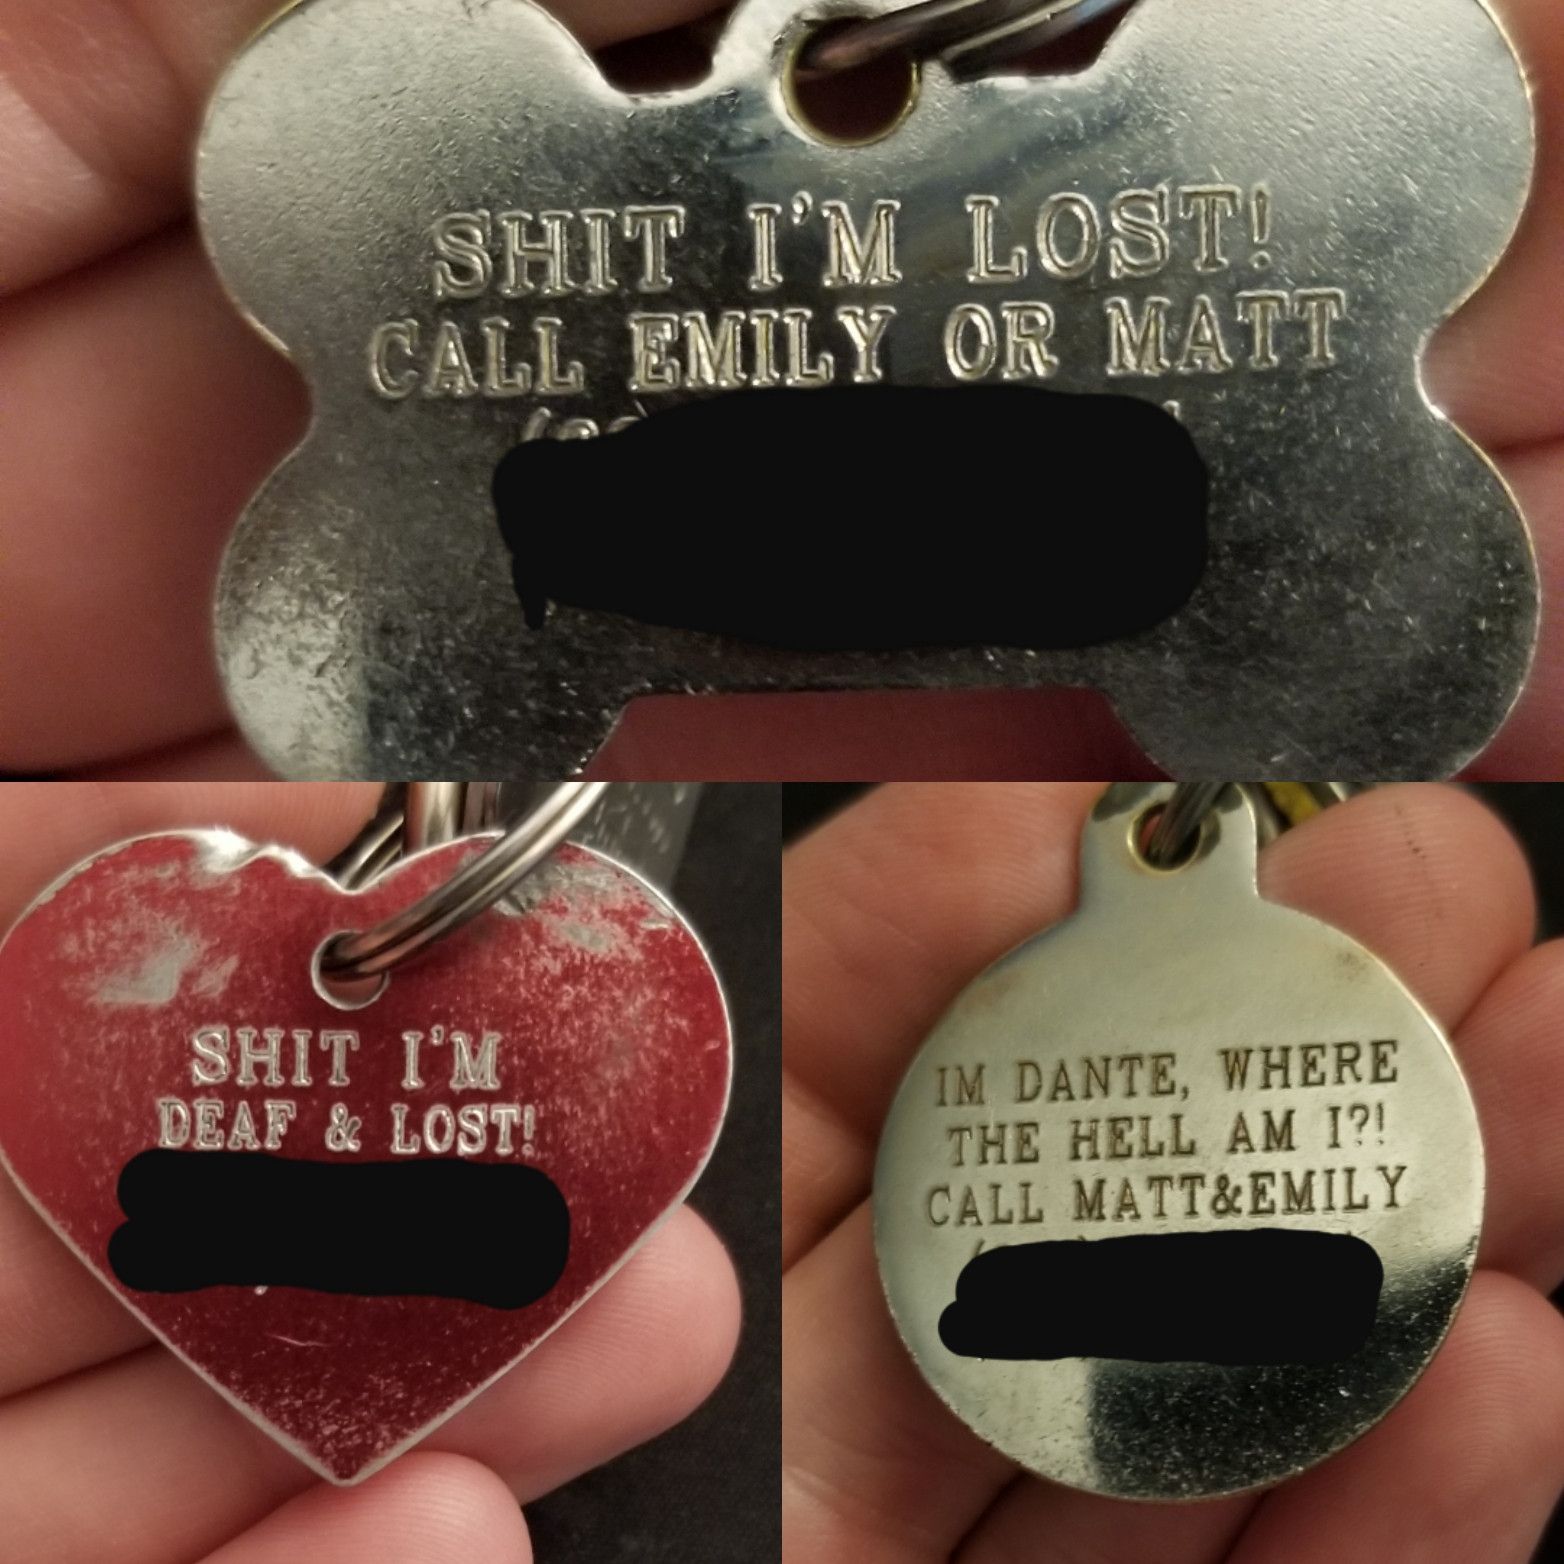 My dogs' tags